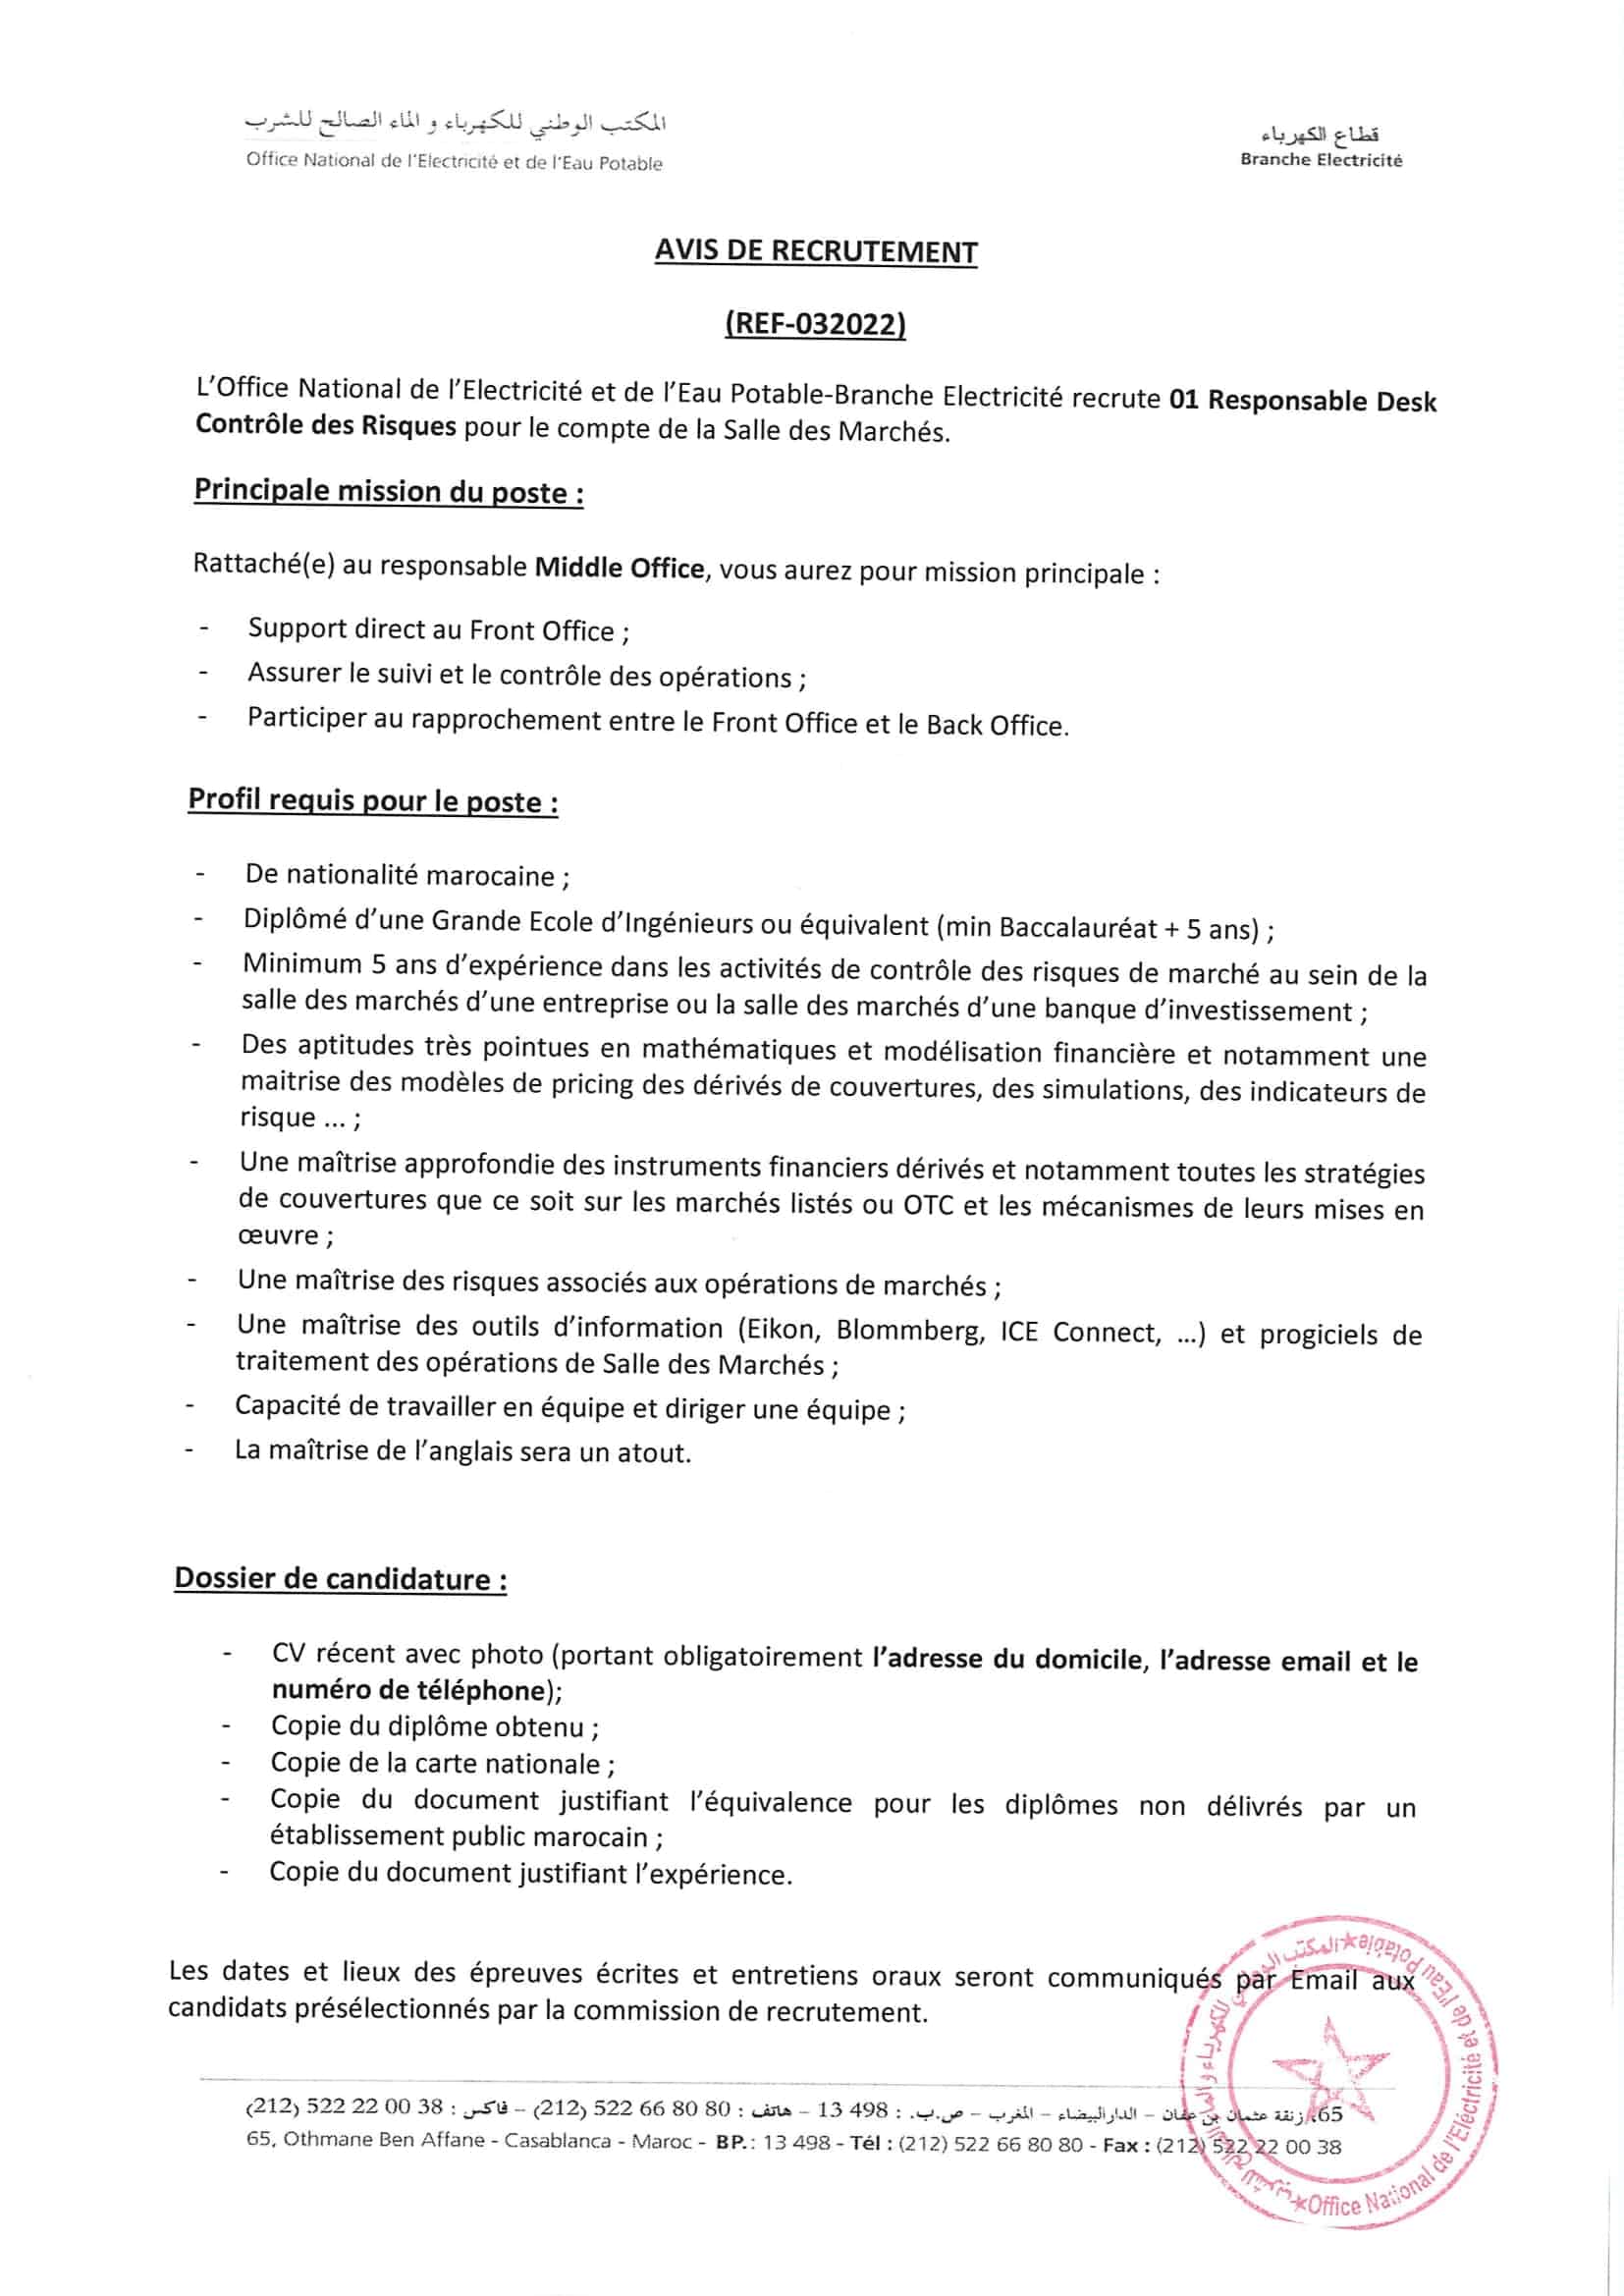 ONEE-Branche-Electricite-Concours-Emploi-Recrutement-marocconcours